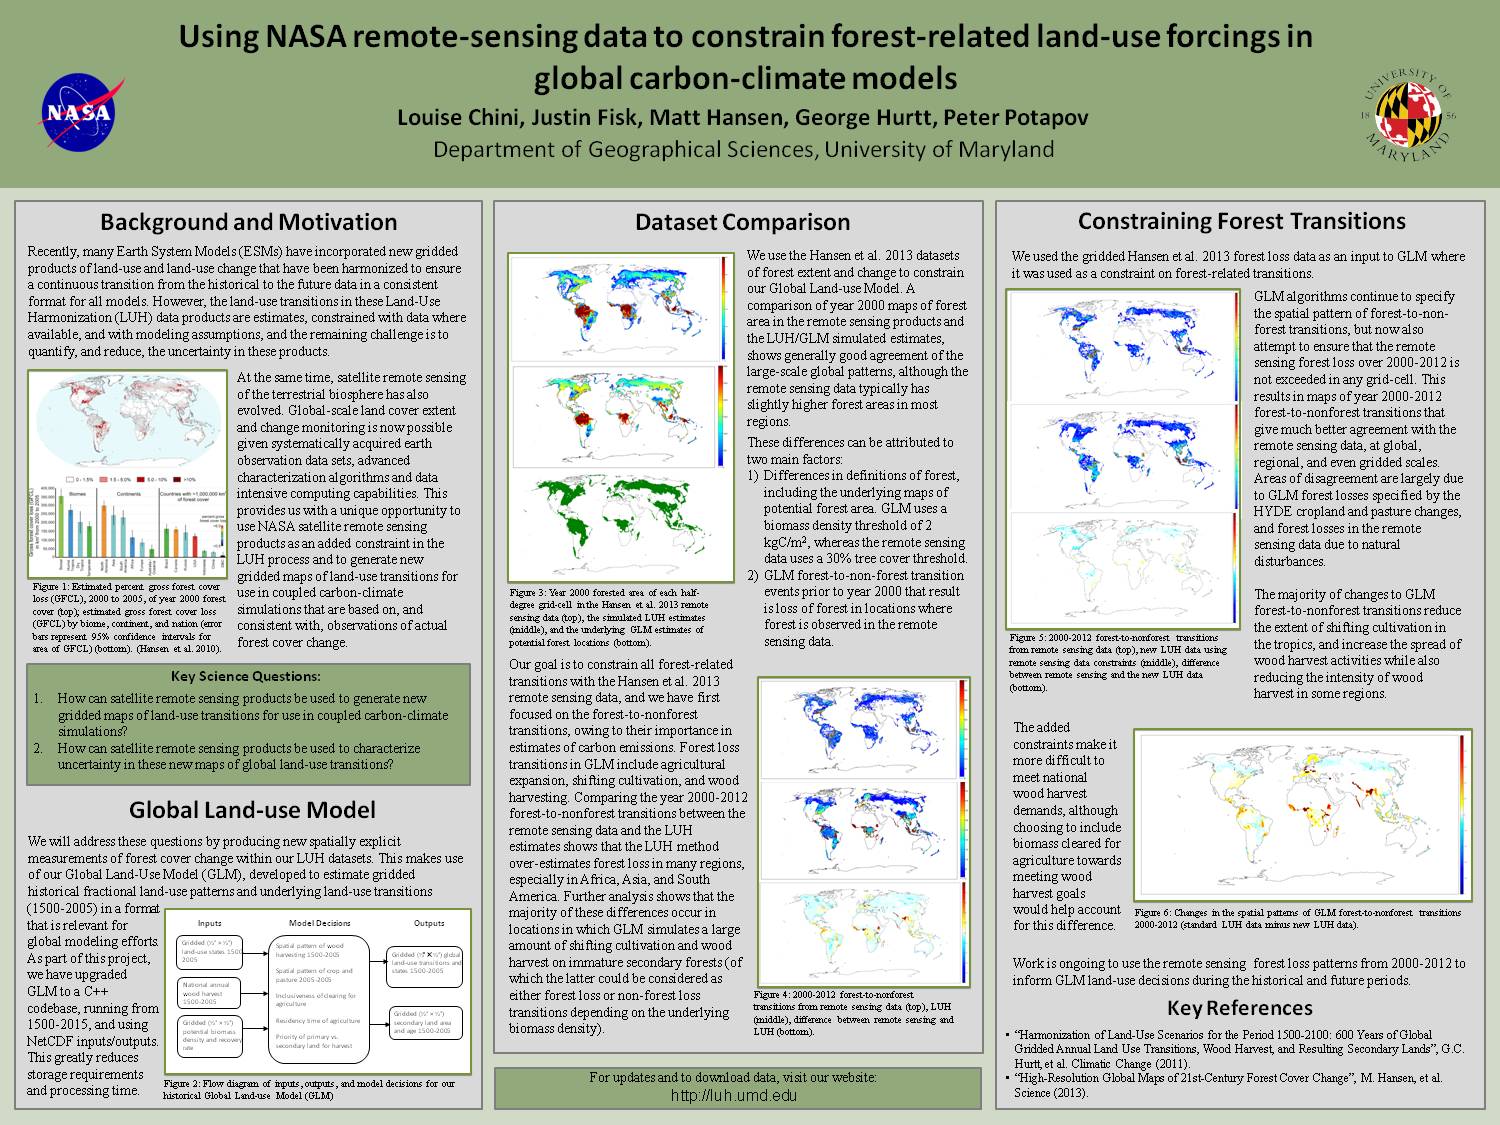 Using Nasa Remote-Sensing Data To Constrain Forest-Related Land-Use Forcings In Global Carbon-Climate Models by lchini